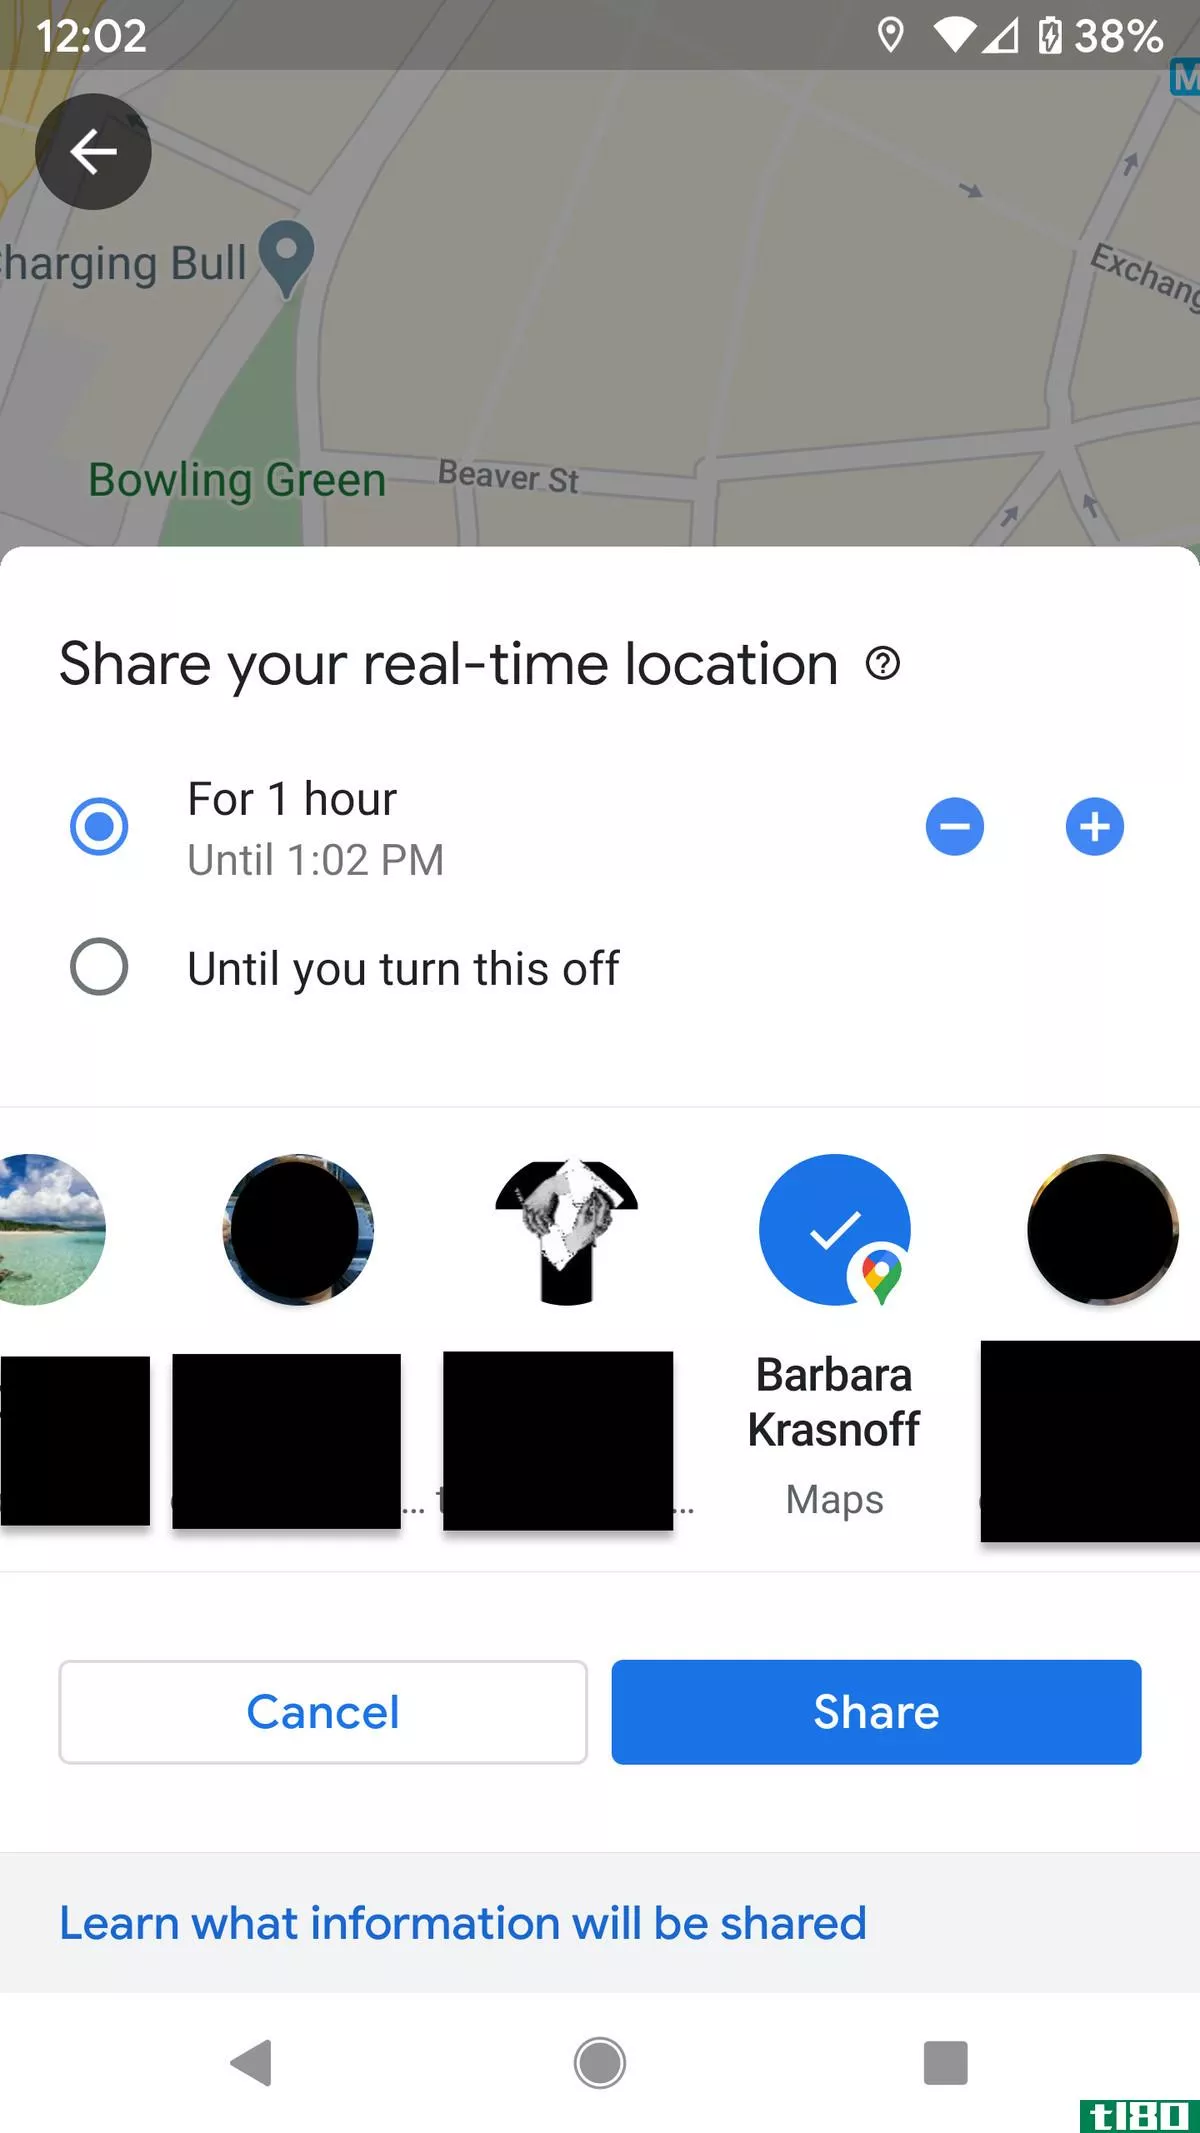 Select the person you want to share your location with.